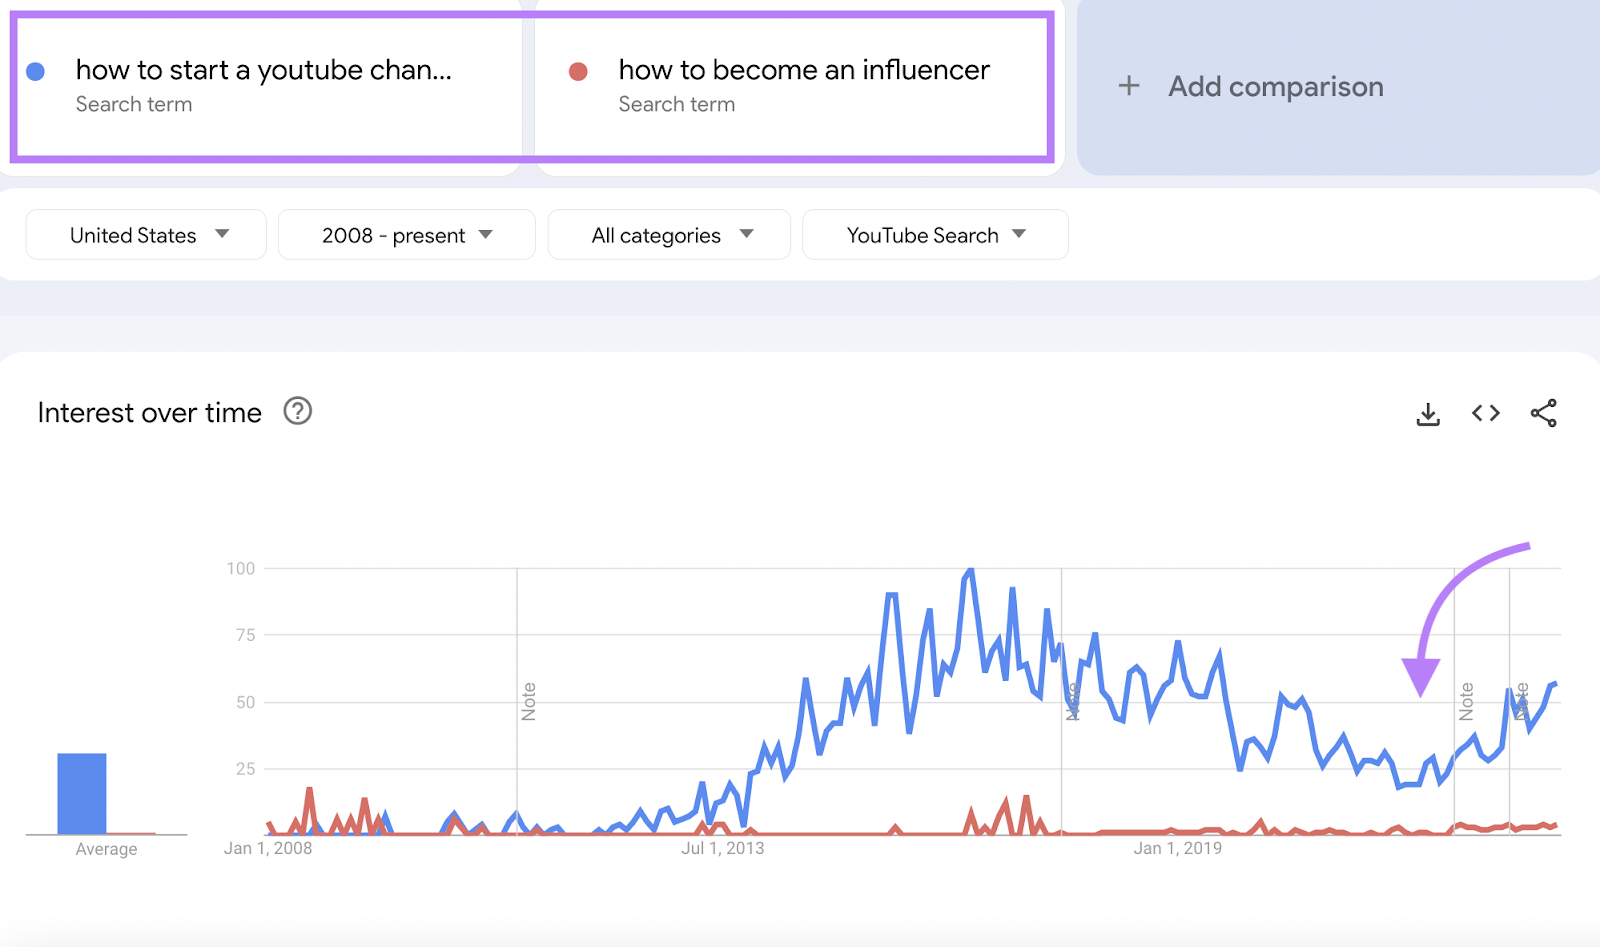 Google Trends "Interest over time" graph comparing “how to start a youtube channel” versus "how to become an influencer"